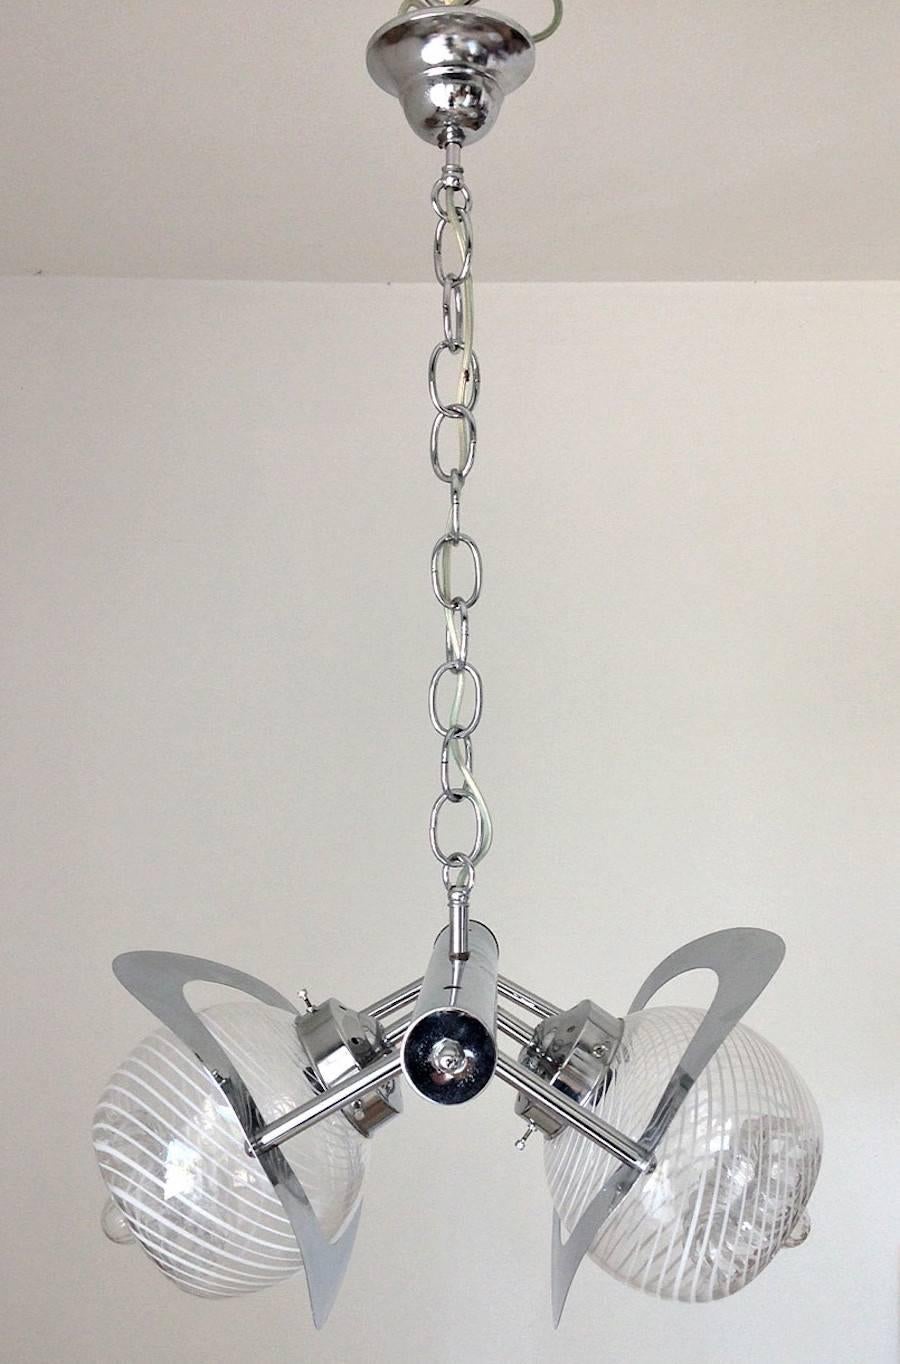 Vintage Italian pendant with clear Murano glass shades hand blown with white Murano glass swirls and textured spiked design, mounted on chrome frame / Designed by Sciolari circa 1960’s / Made in Italy
2 lights / E12 or E14 type / max 40W each
Width: